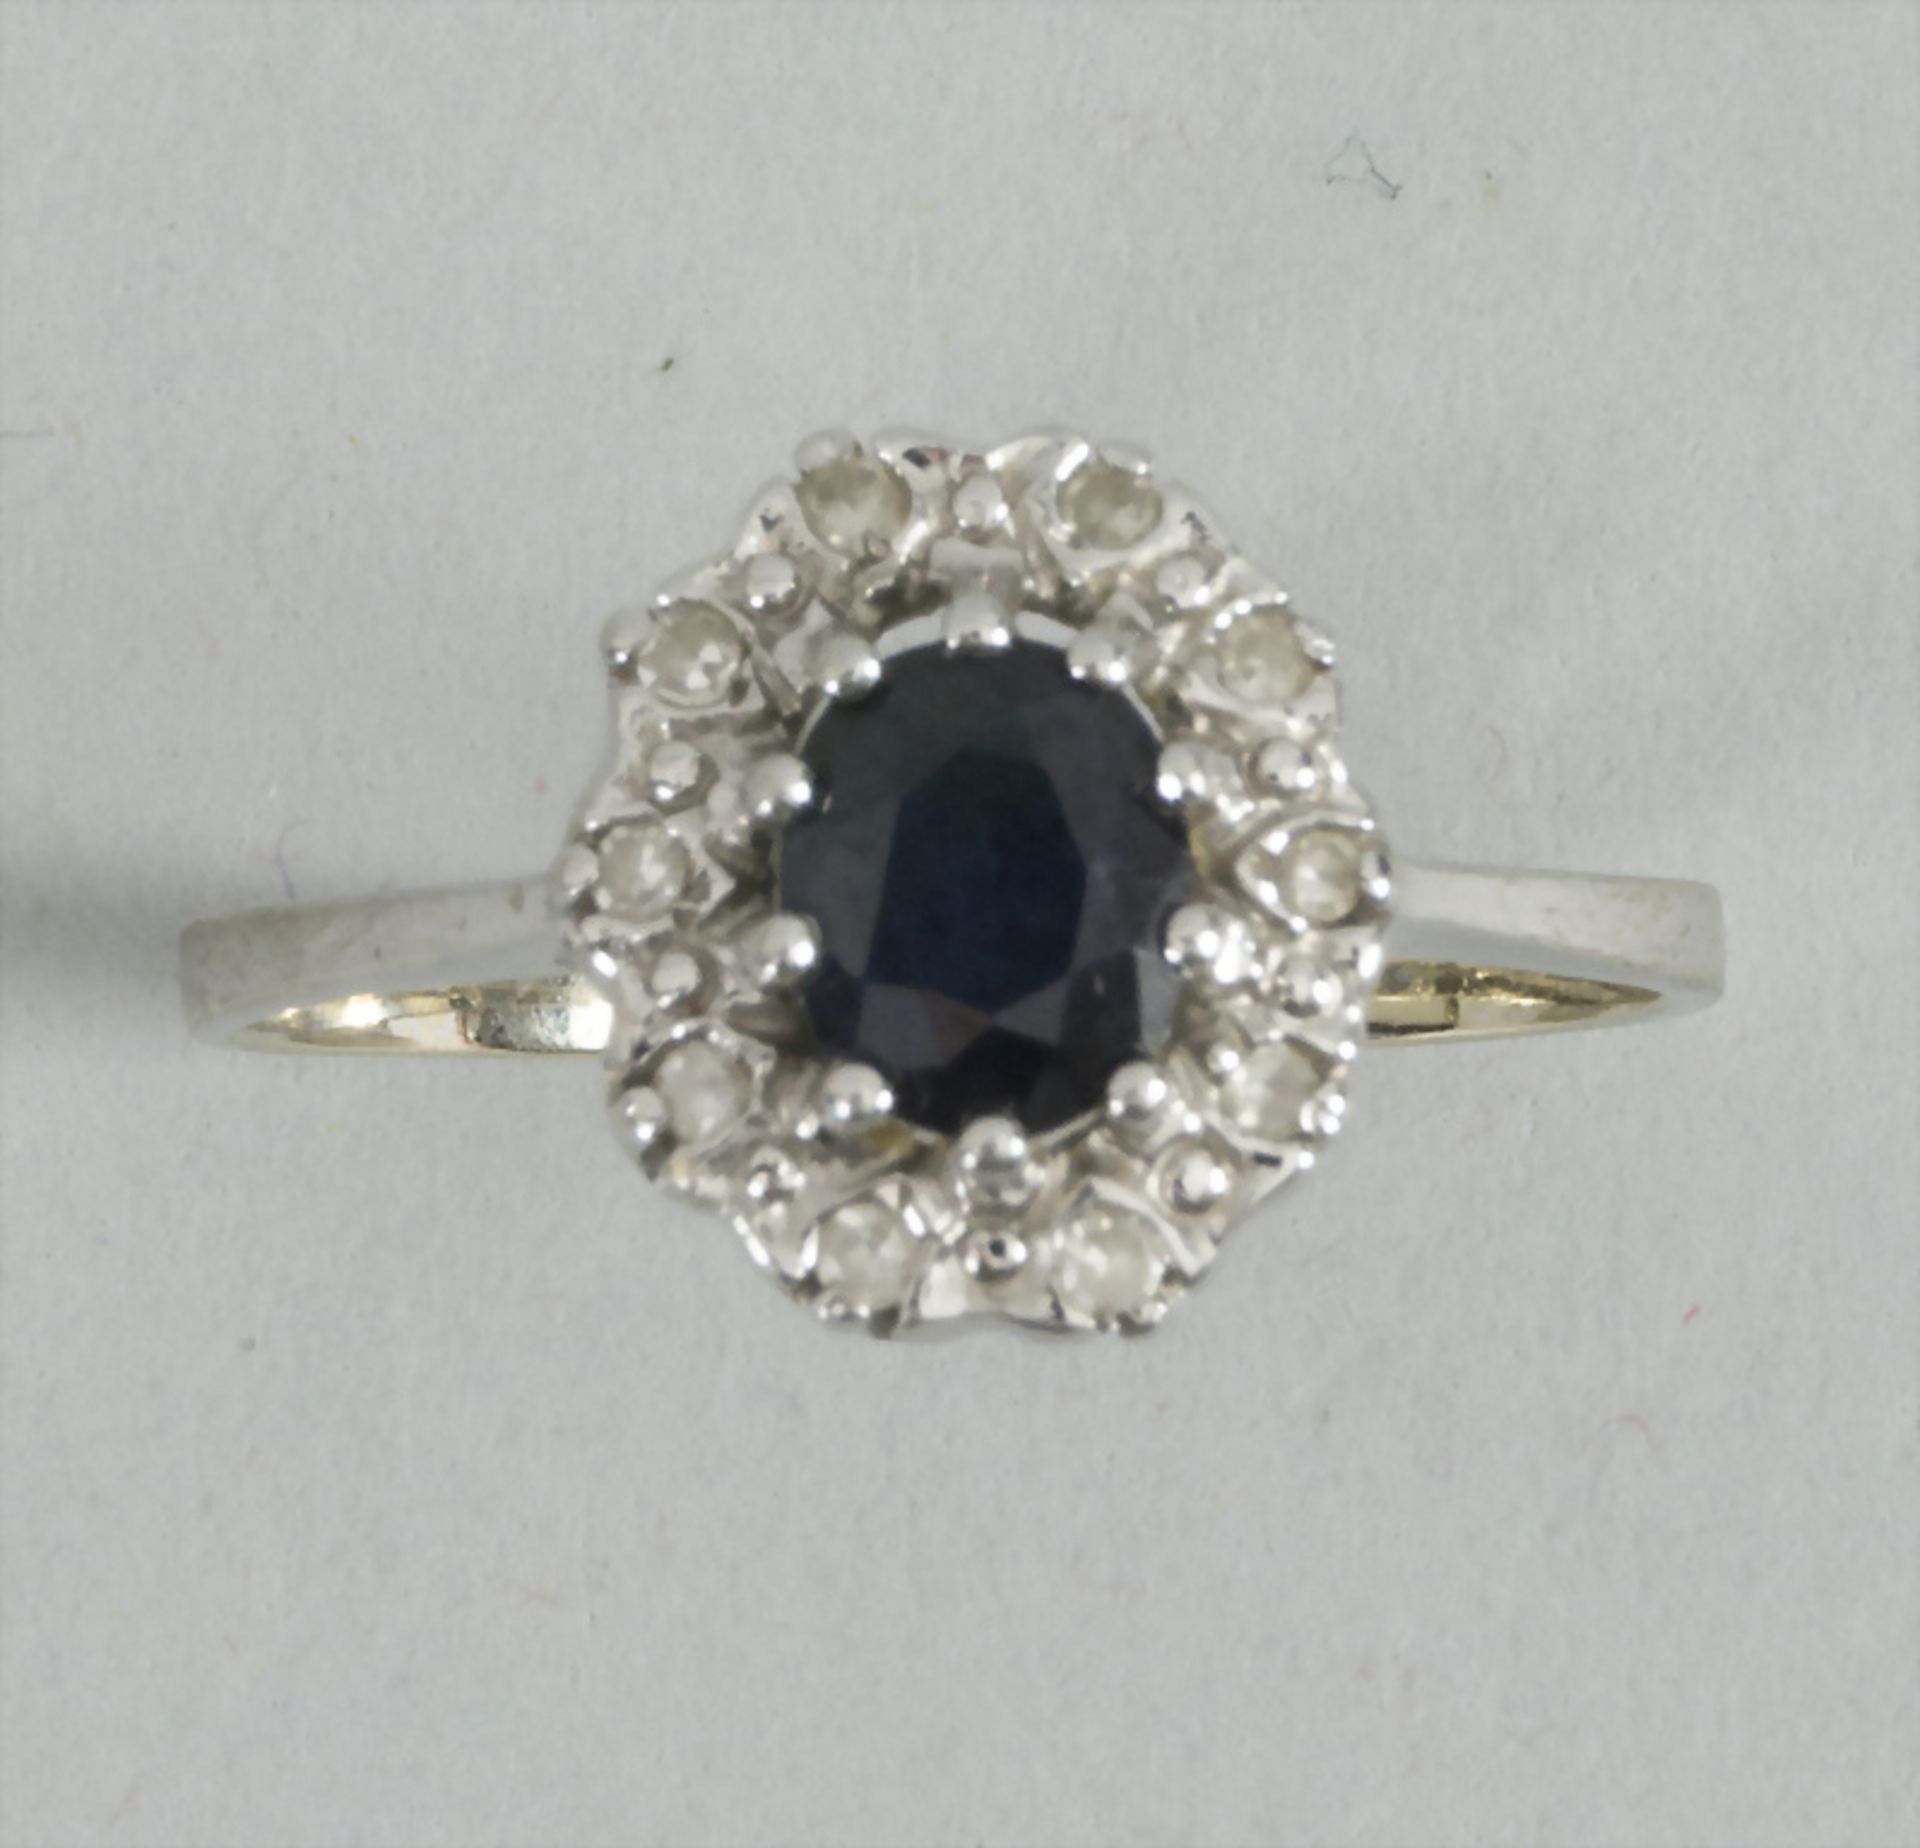 Saphir-Diamant-Ring / A 14k gold ring with sapphire and diamonds